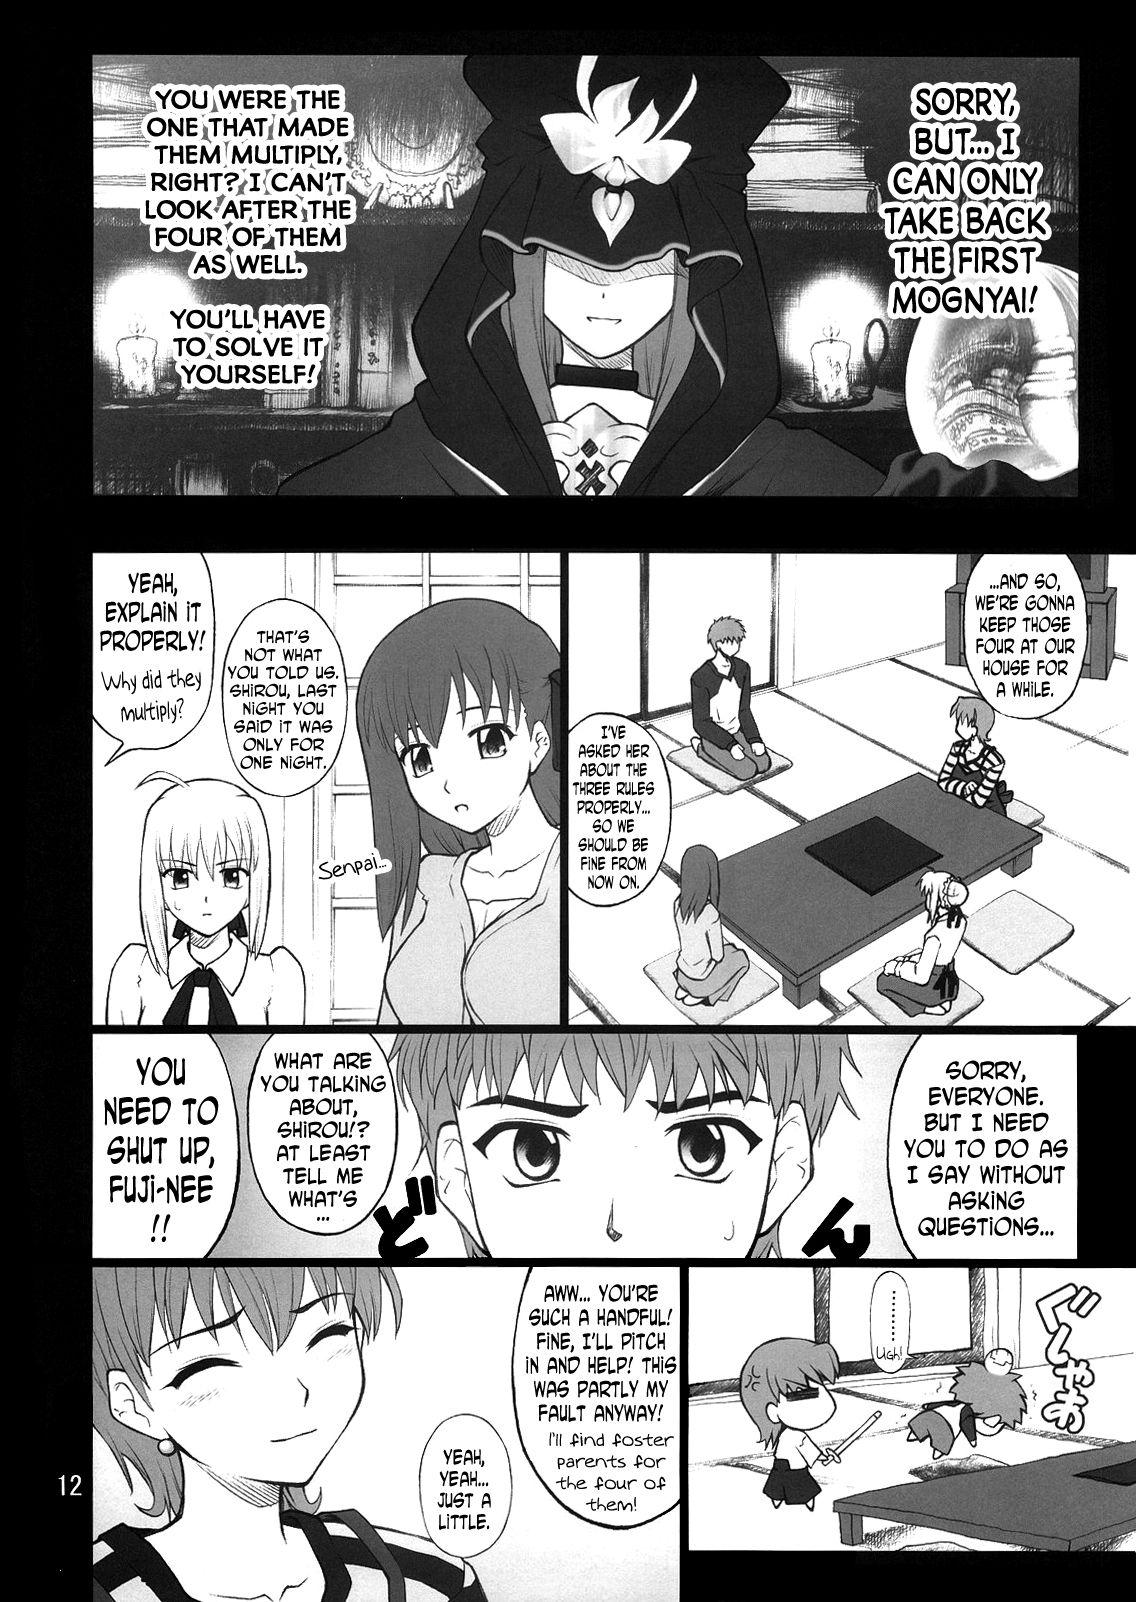 Strap On Grem-Rin 2 - Fate stay night Smalltits - Page 11